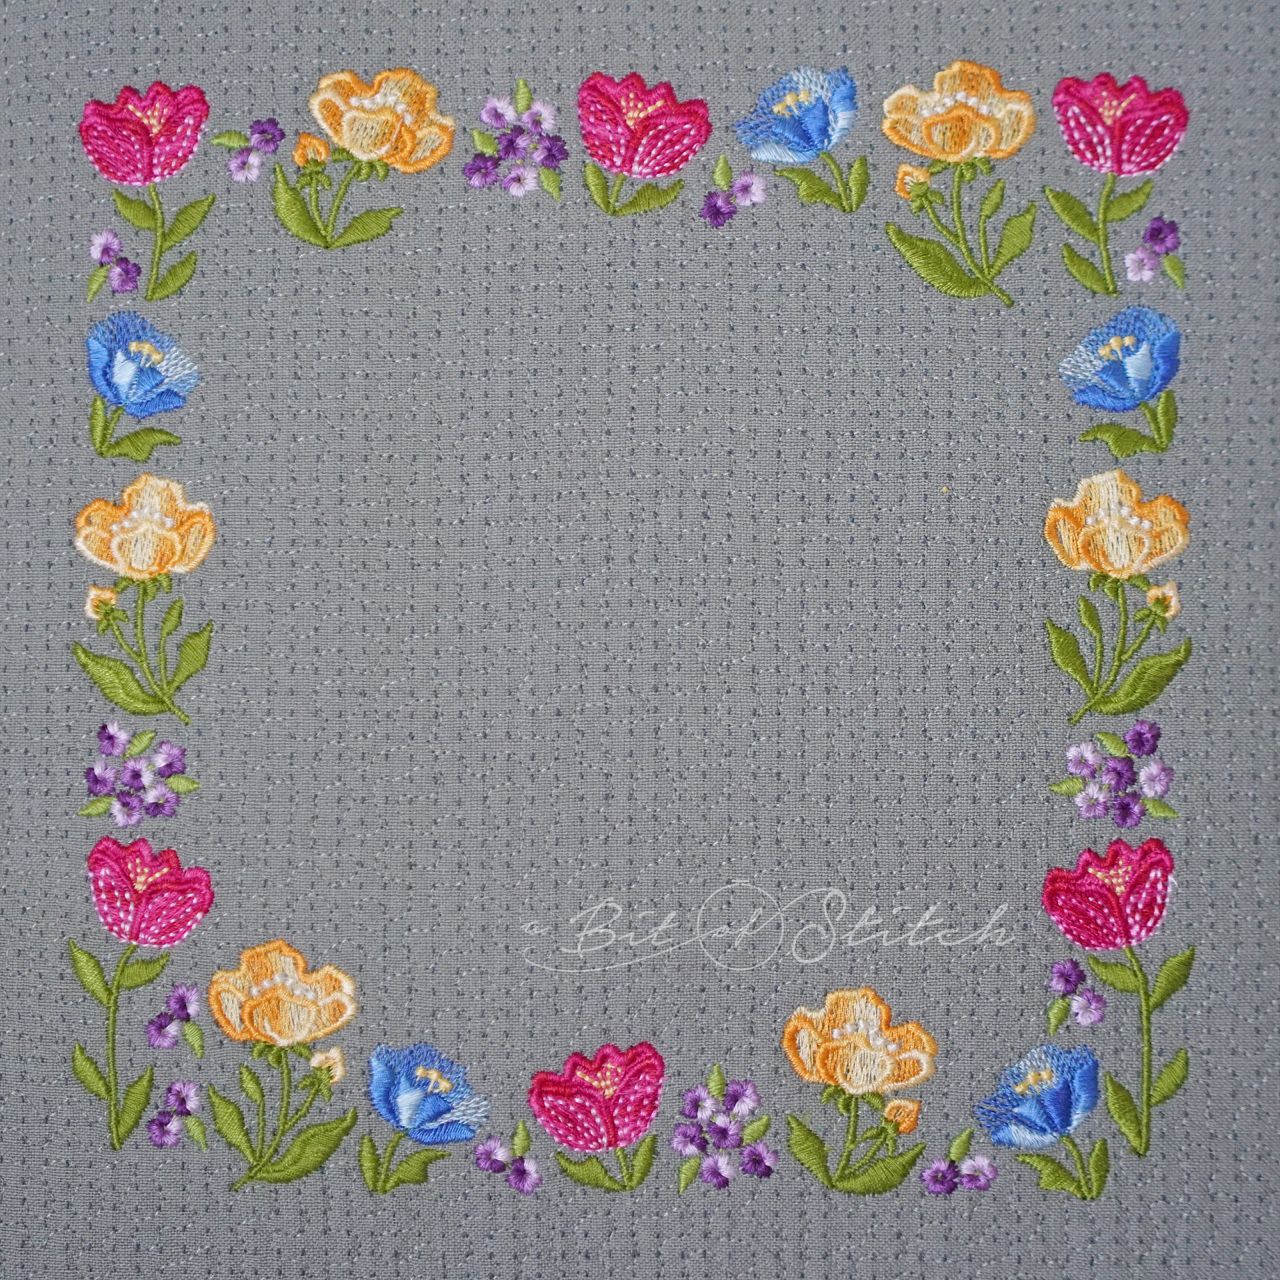 Fancy Frames floral machine embroidery design by A Bit of Stitch